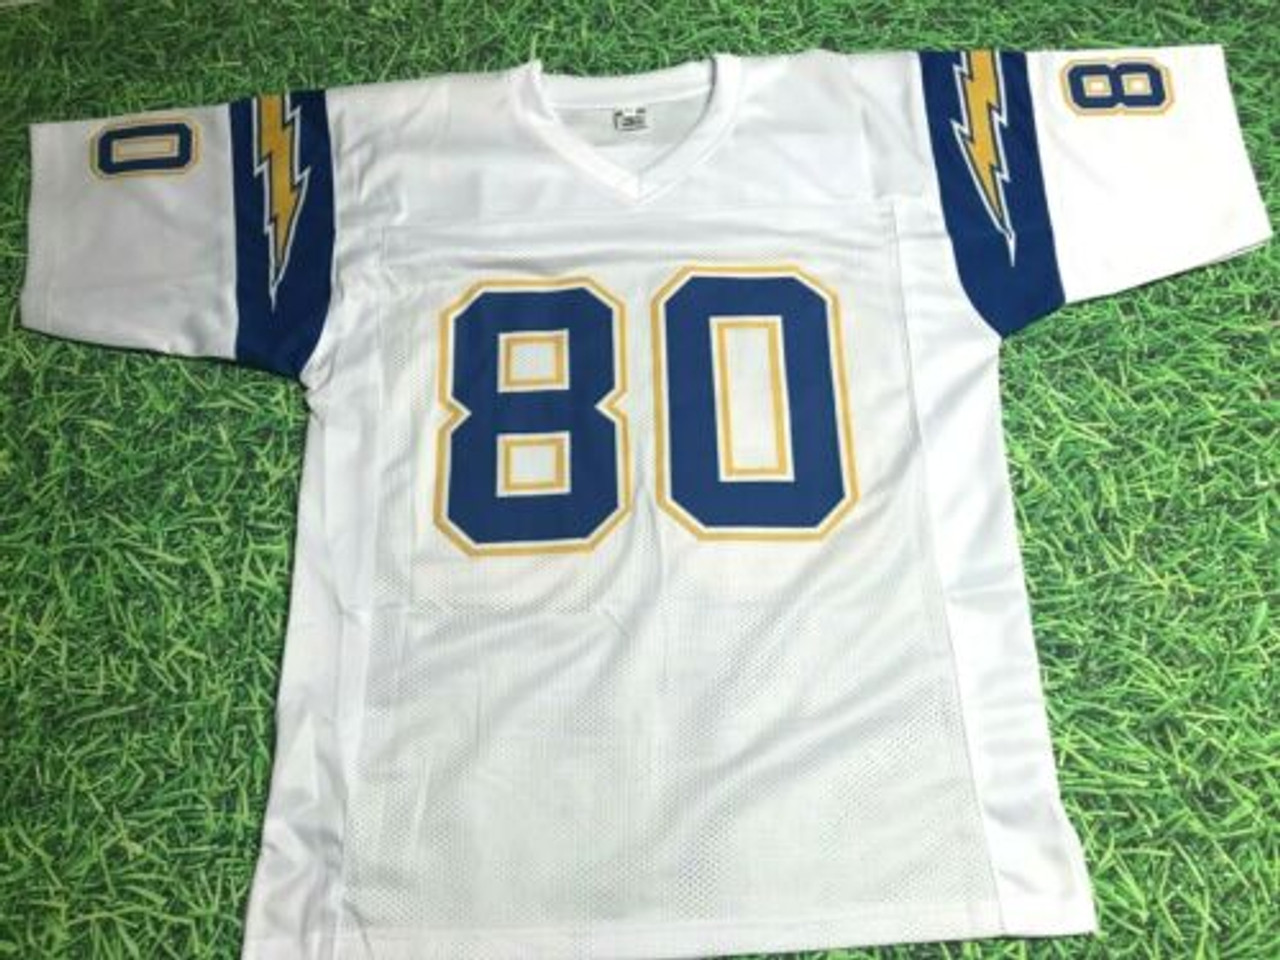 Chargers Football Uniforms, Jerseys, and Shorts